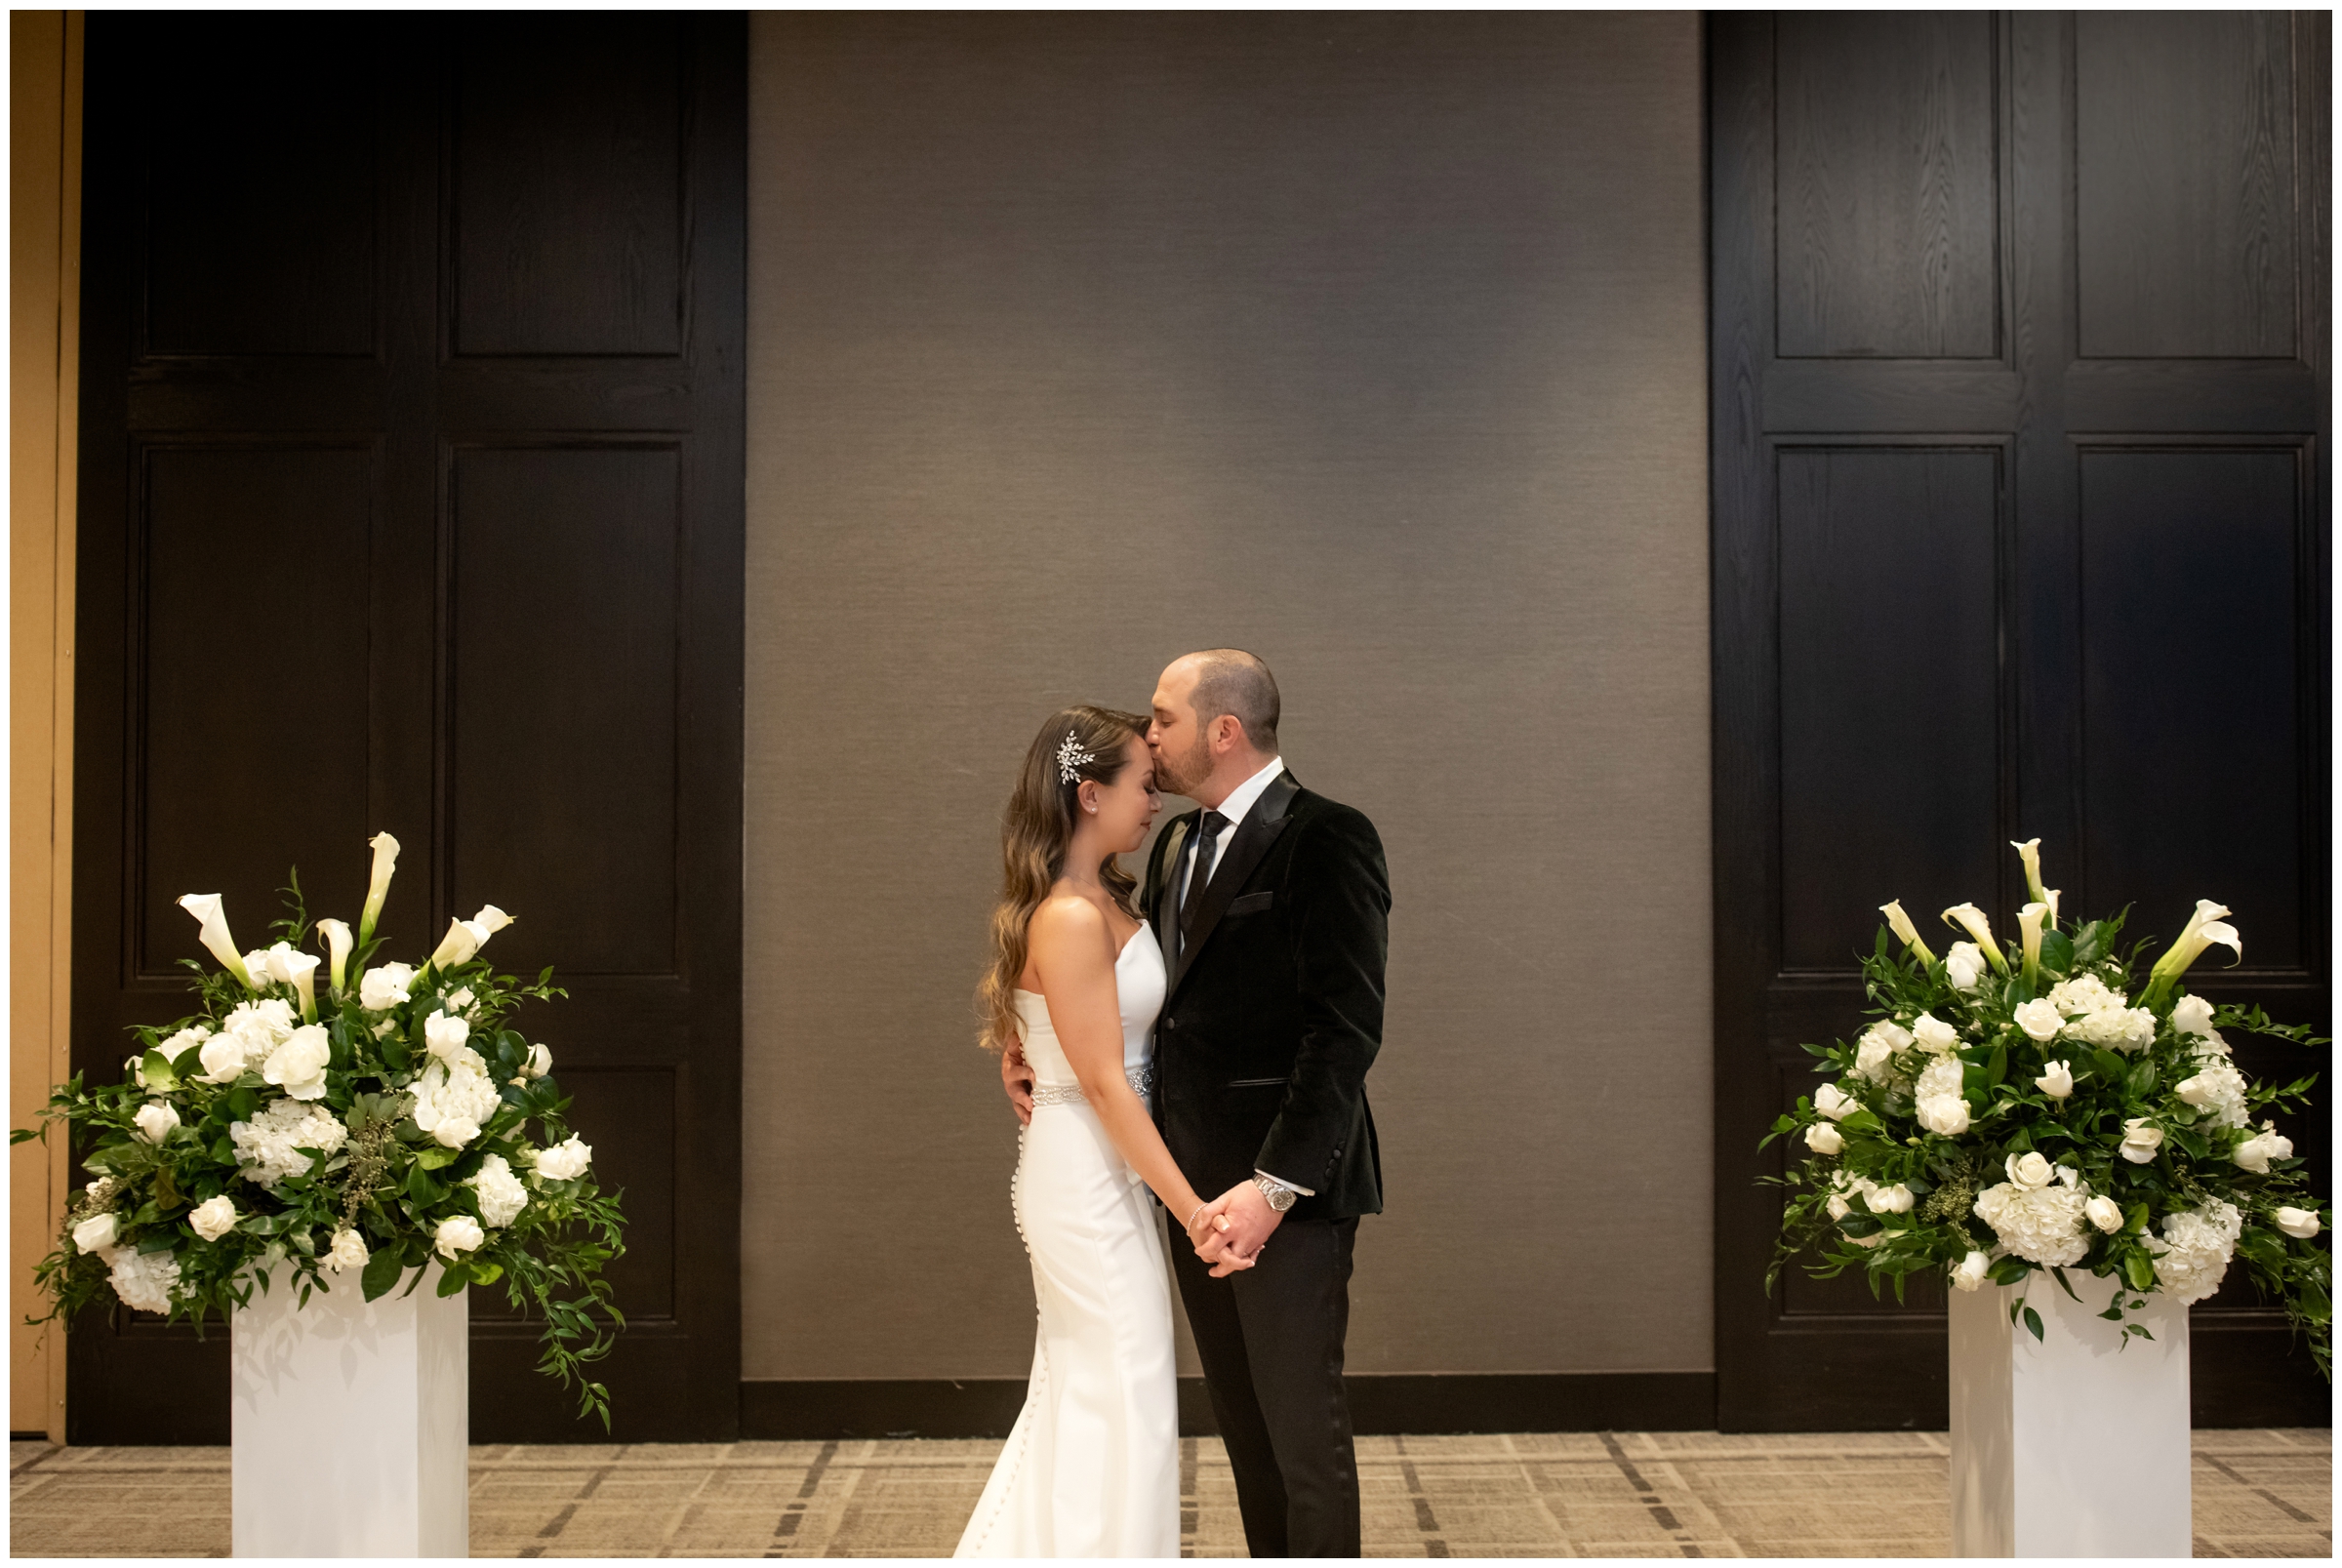 groom kissing bride's forehead during indoor winter wedding pictures in Cherry Creek area of Denver Colorado 